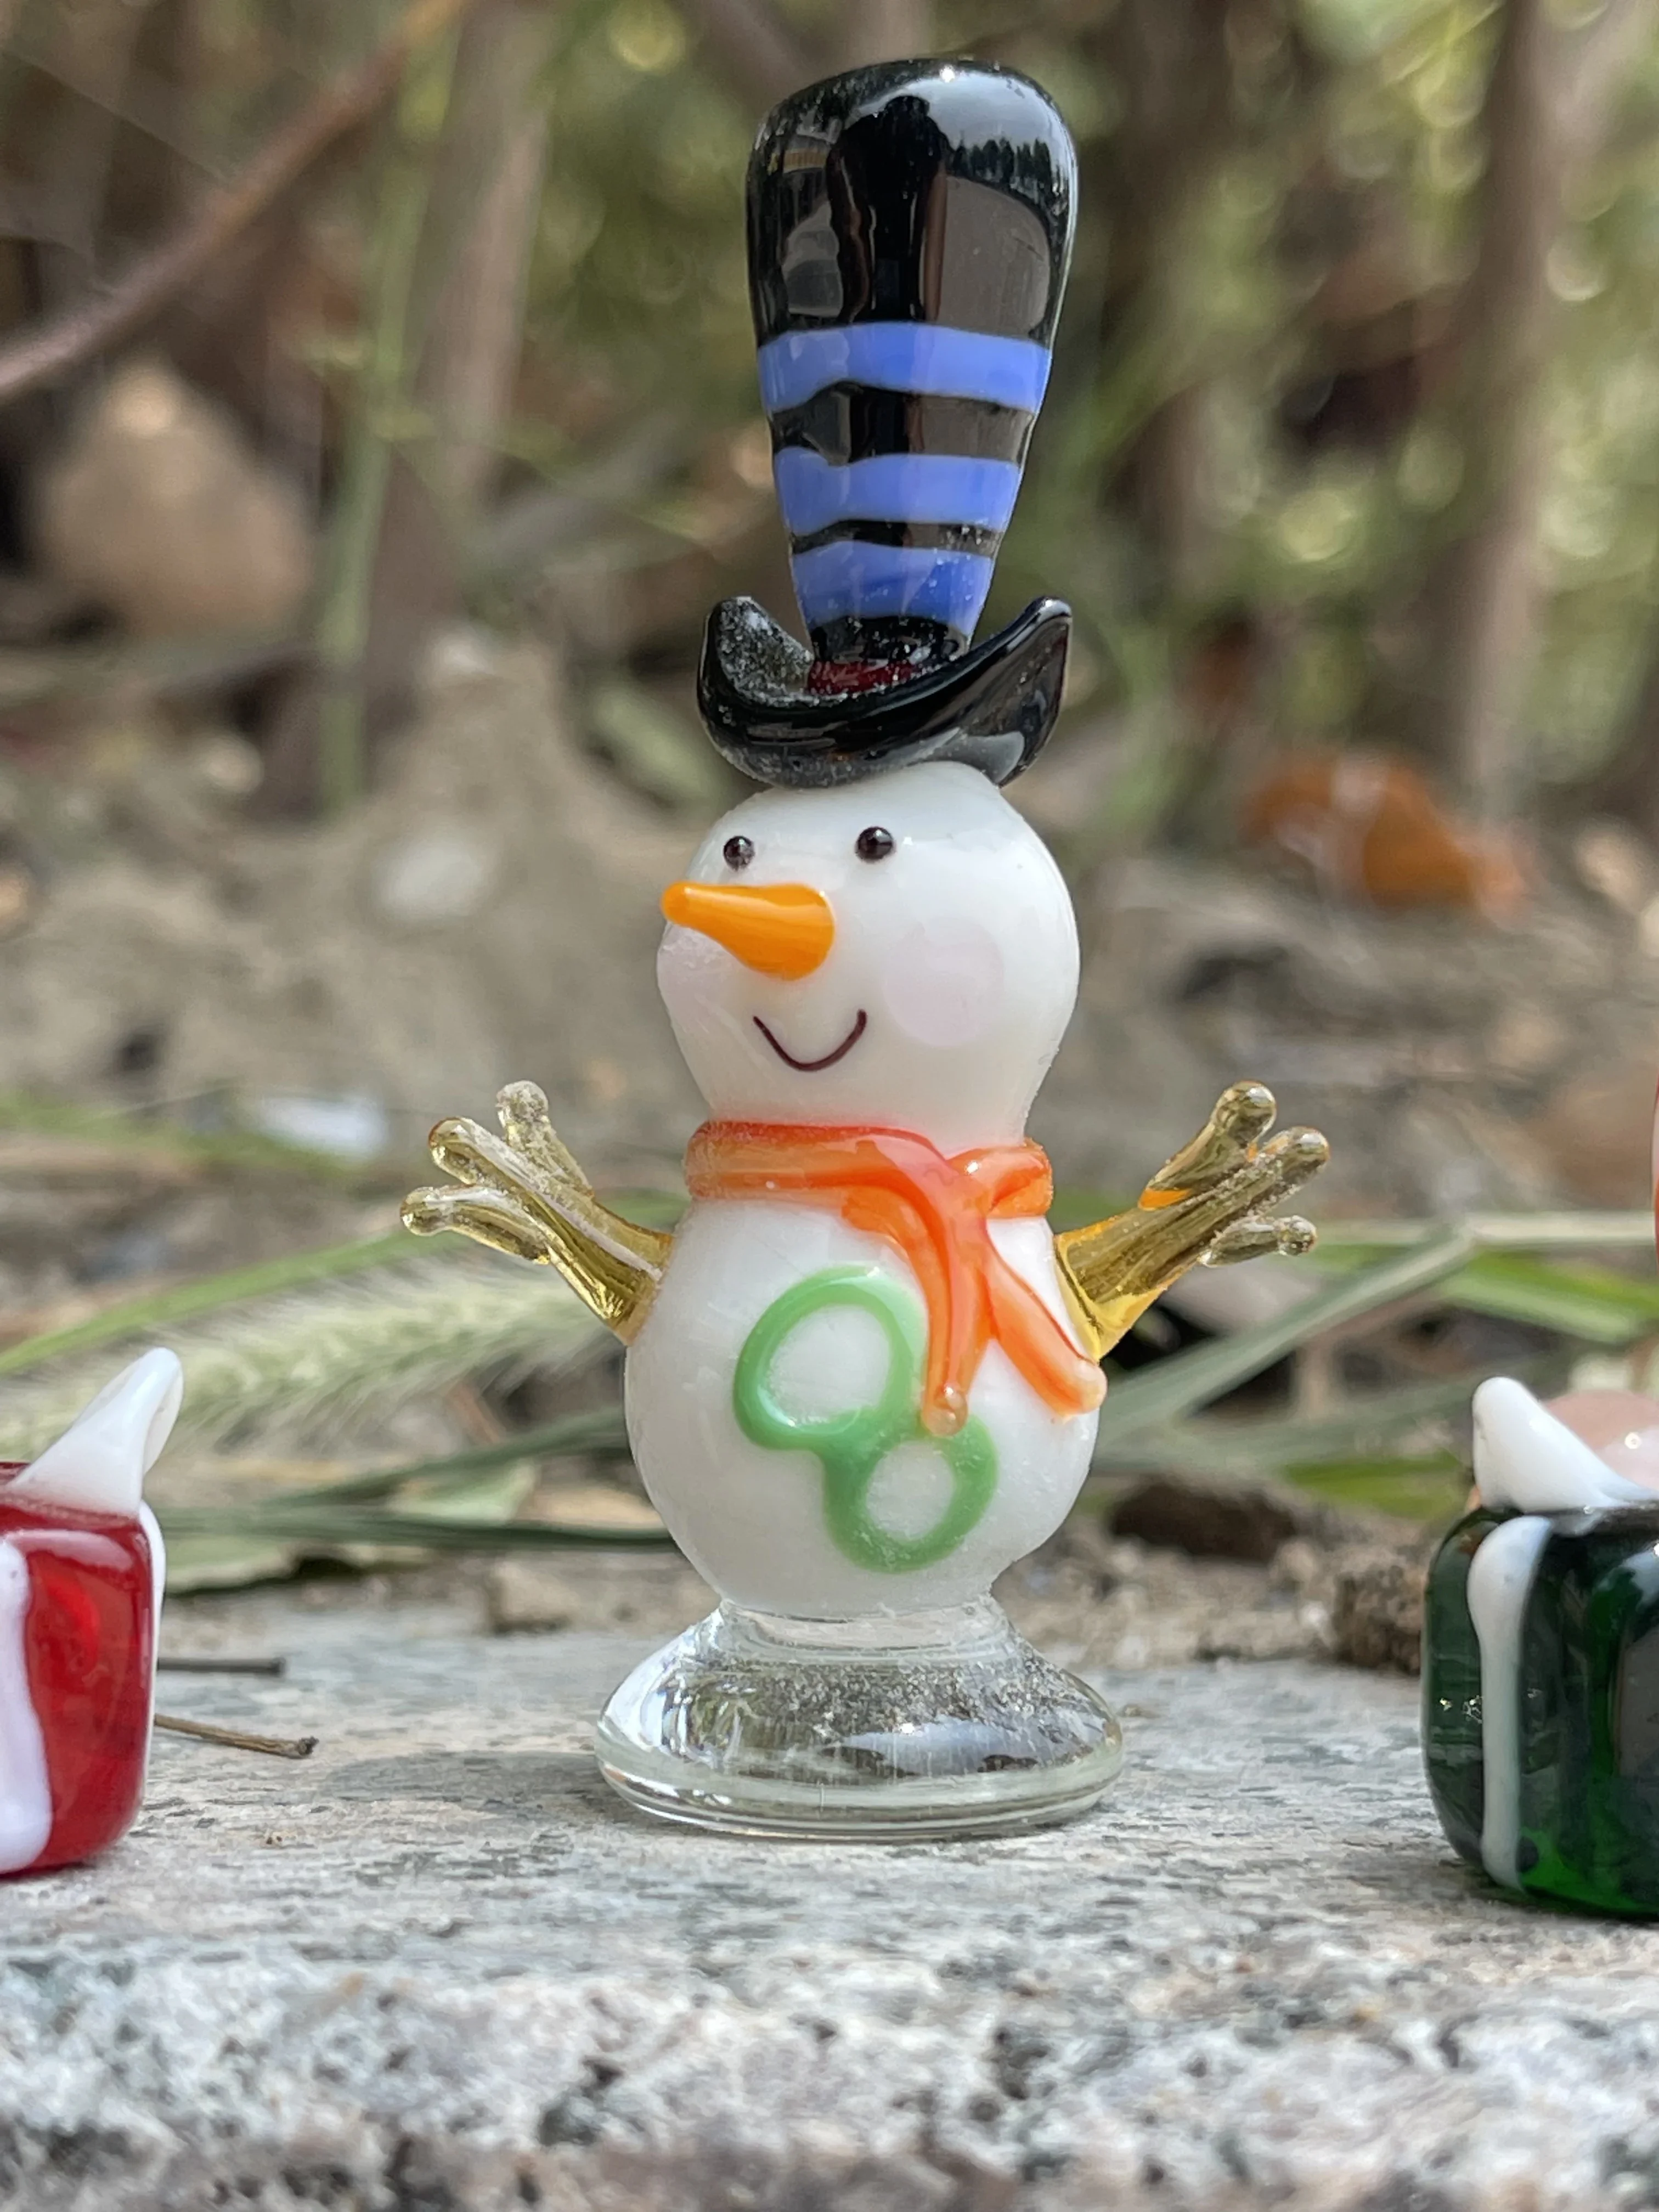 

Glass Handmade Lantern Decoration Crafts Glass Hatted Snowman Cute Gadget Intangible Cultural Heritage Christmas